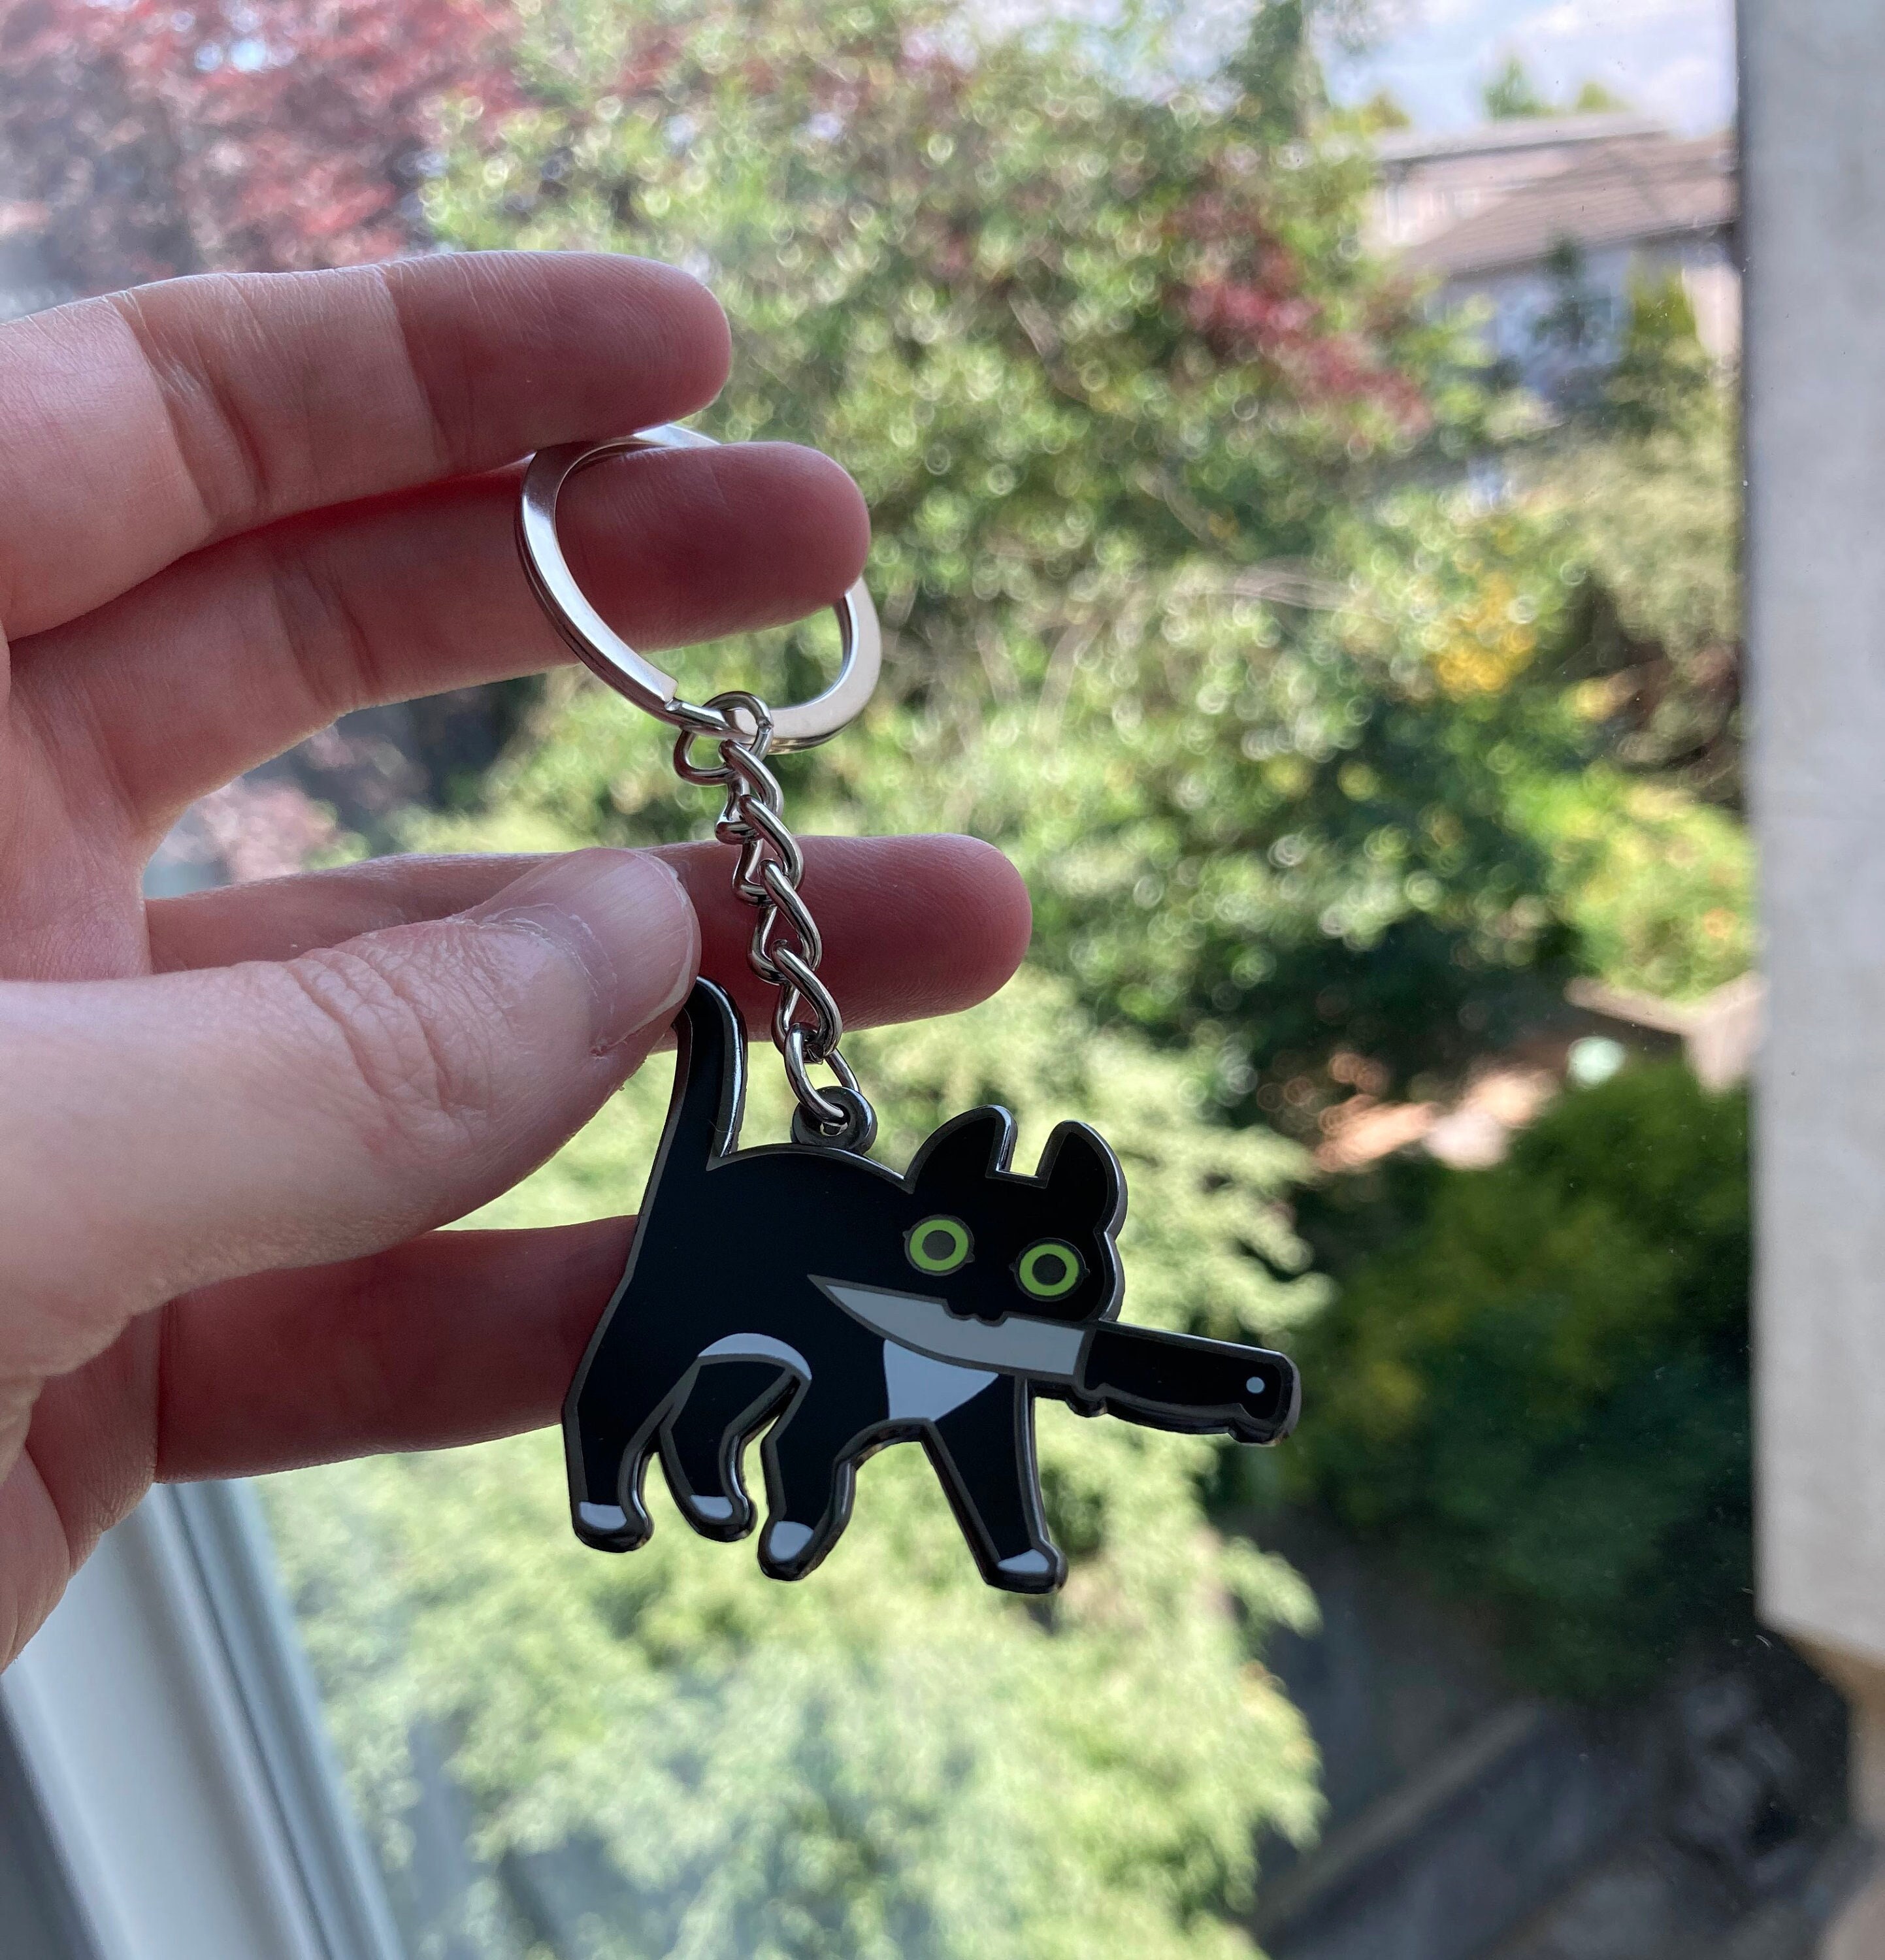 Cat keyrings / Domestic house cat charms. Kitten collar charms & keychains.  black, ginger, white.. — Sketched by Ste